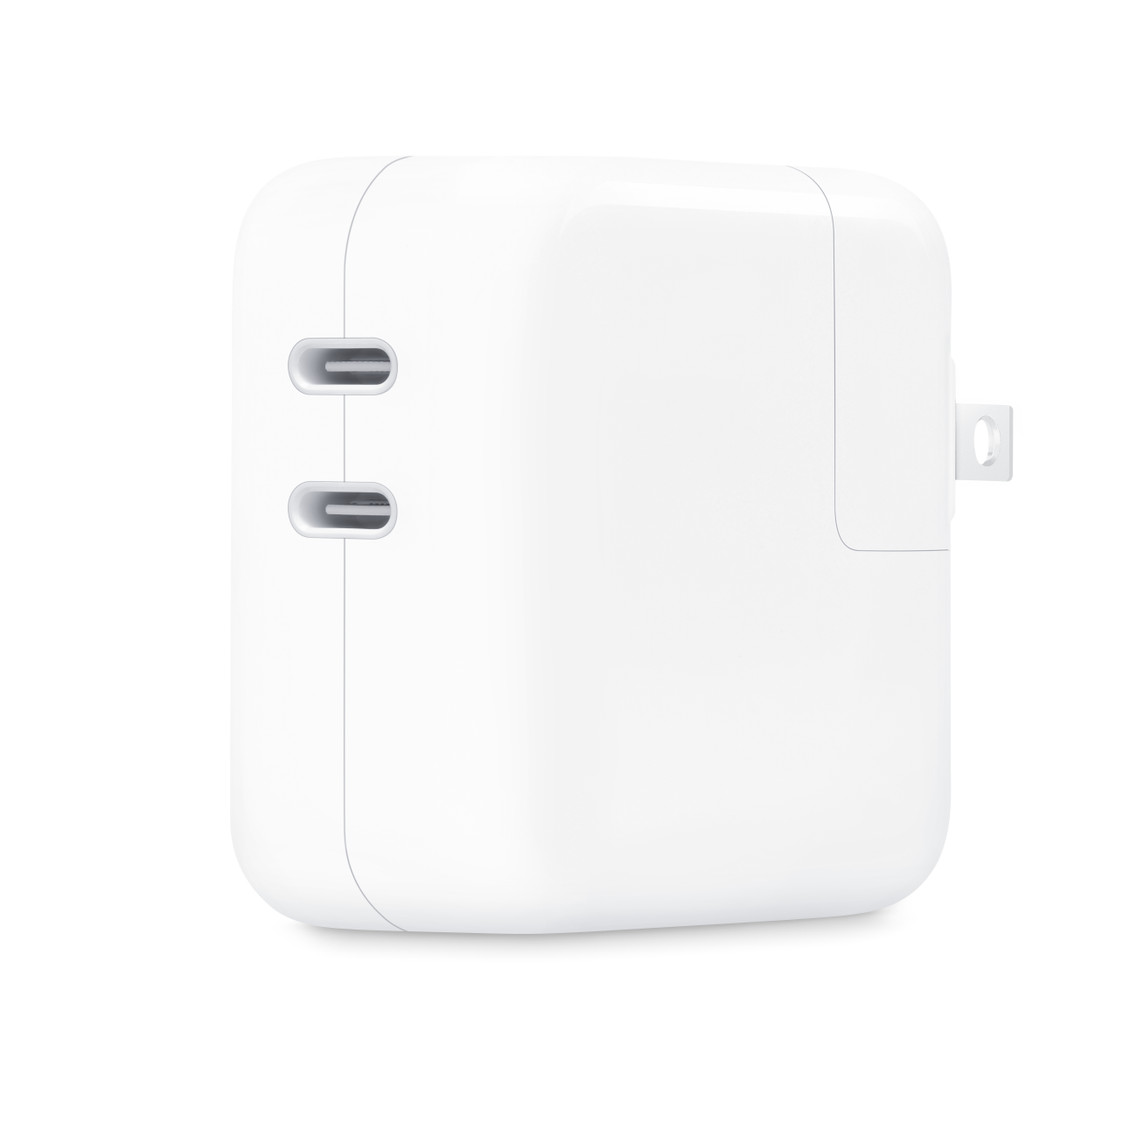 The 35 watt Dual USB-C Port Power Adapter allows you to charge two devices at the same time.